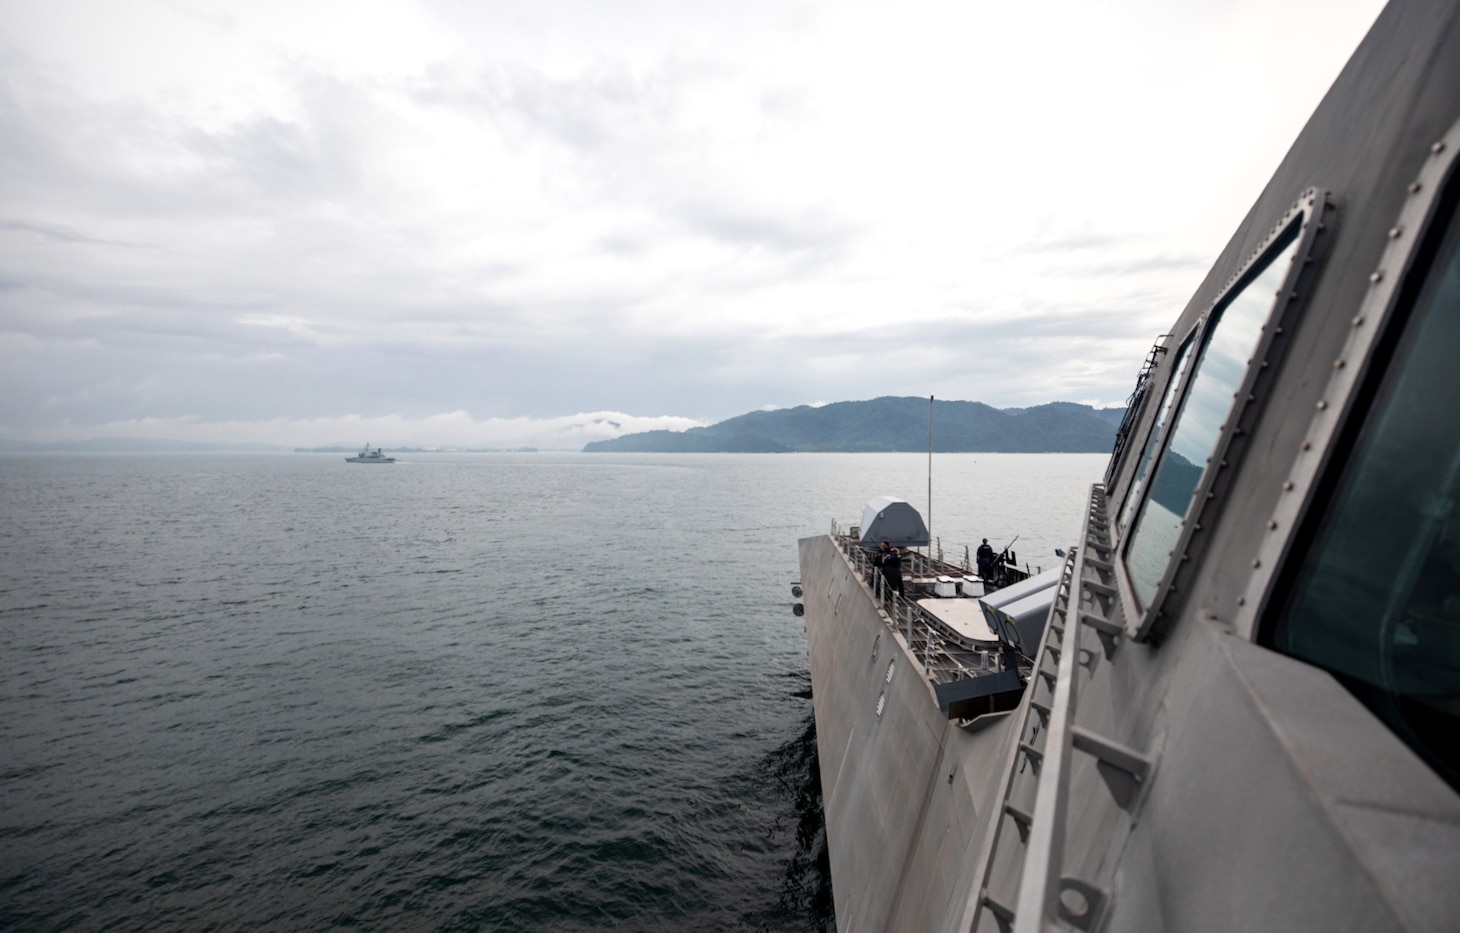 211129-N-LI768-1026 LUMUT, Malaysia (Nov. 29, 2021) - The Independence-variant littoral combat ship USS Tulsa (LCS 16) arrives at Lumut, Malaysia, following Maritime Training Activity (MTA) Malaysia 2021. MTA Malaysia 2021 is a continuation of 27 years of maritime engagements between the U.S. Navy and Royal Malaysian Navy serving to enhance mutual capabilities in ensuring maritime security and stability. Tulsa, part of Destroyer Squadron (DESRON) 7, is on a rotational deployment, operating in the U.S. 7th Fleet area of operations to enhance interoperability with partners and serve as a ready-response force in support of a free and open Indo-Pacific region. (U.S. Navy photo by Mass Communication Specialist 1st Class Devin M. Langer)